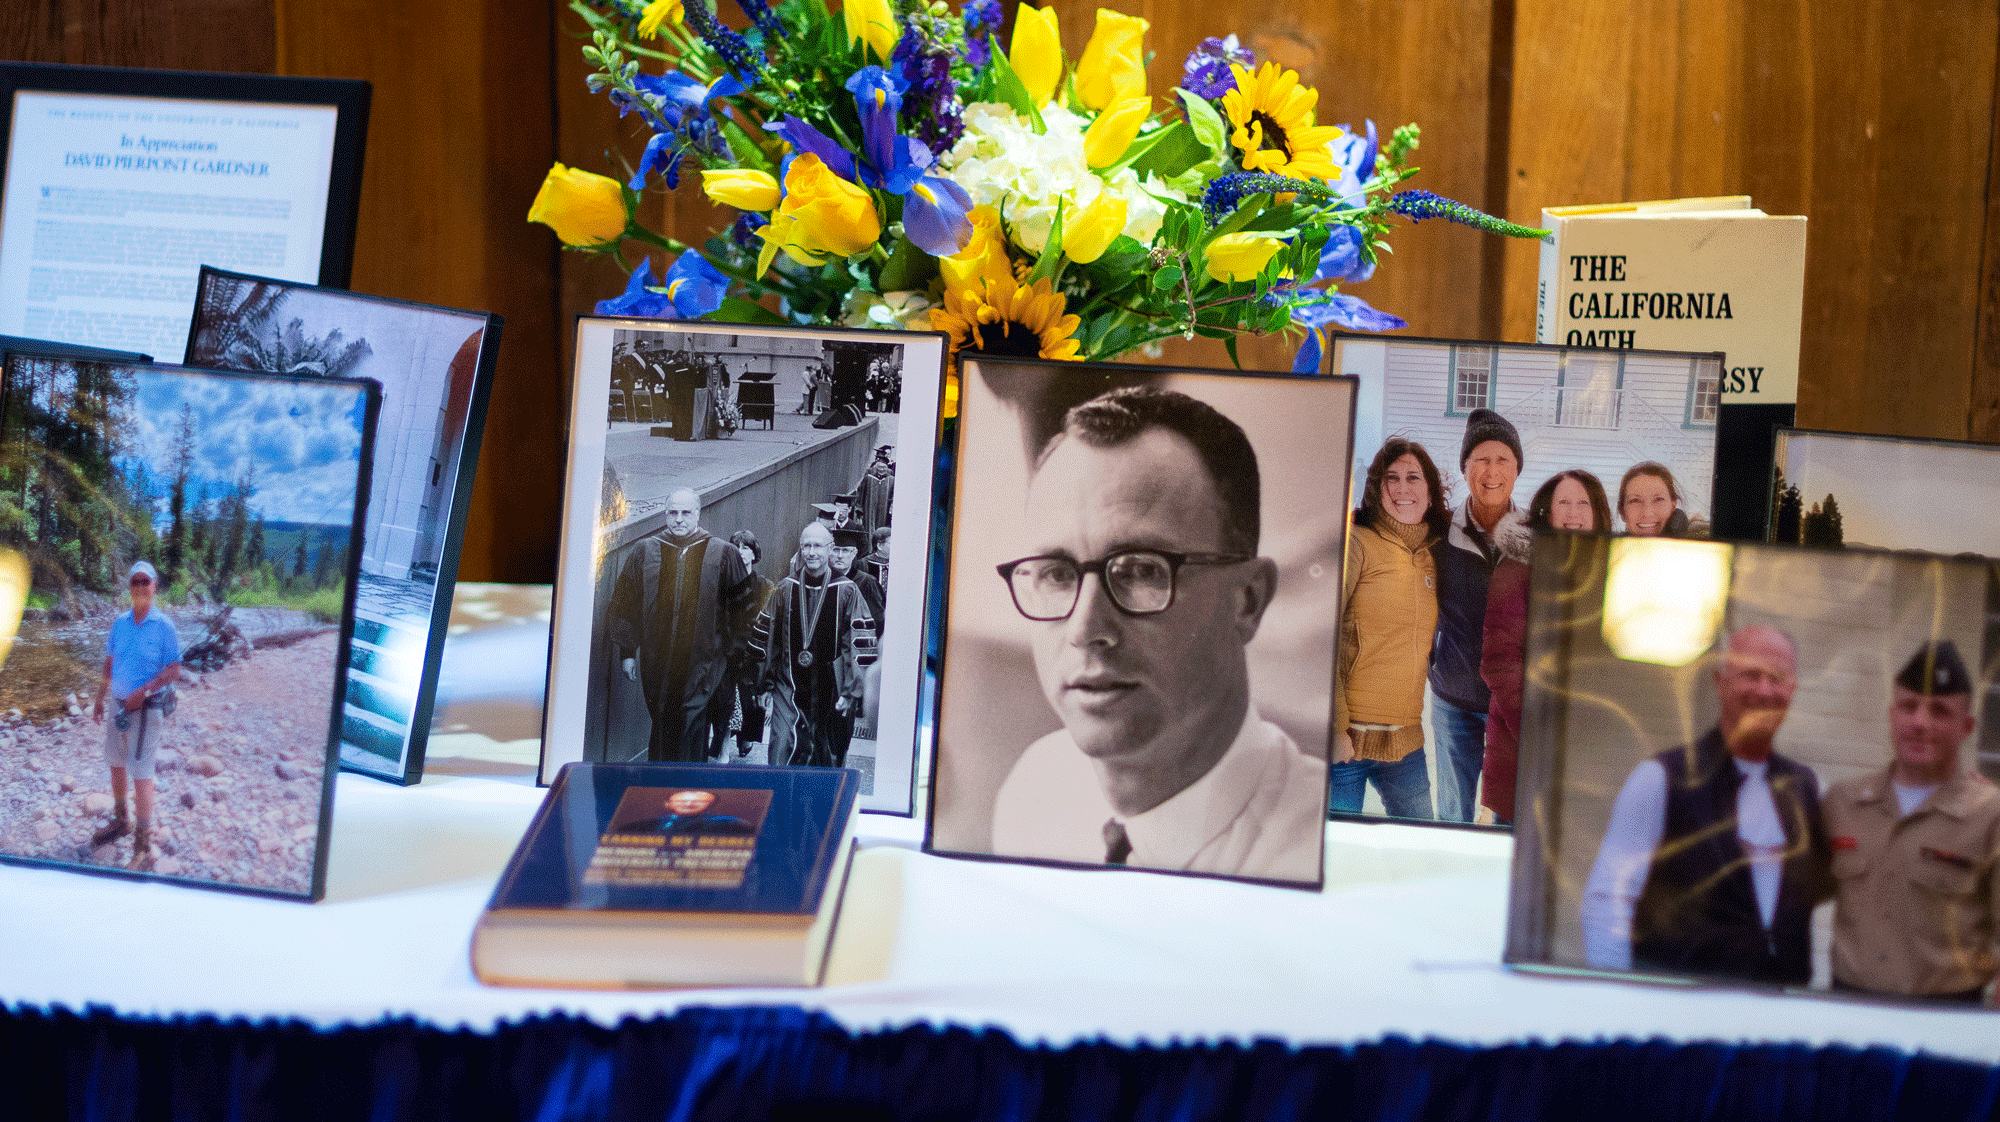 Photos, books and a bouquet adorned a table at the memorial event for former UC President David P. Gardner 